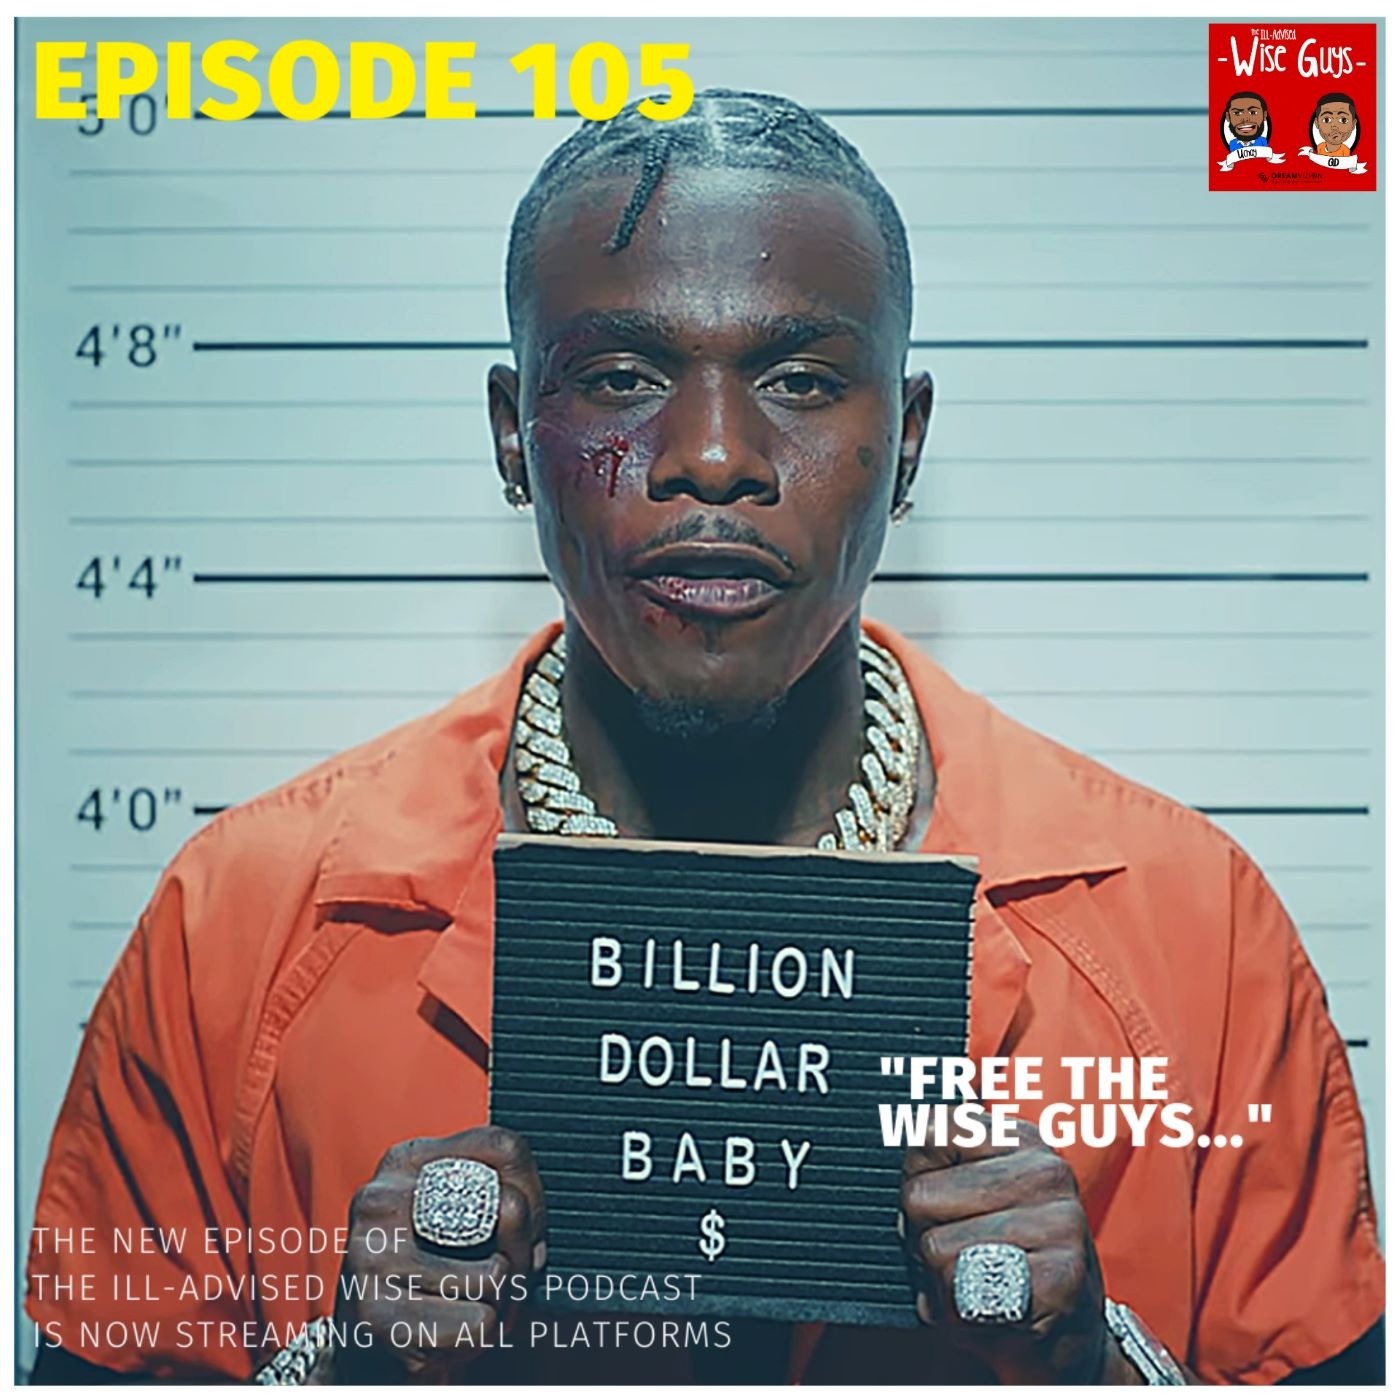 Episode 105 - "Free The Wise Guys..." Image